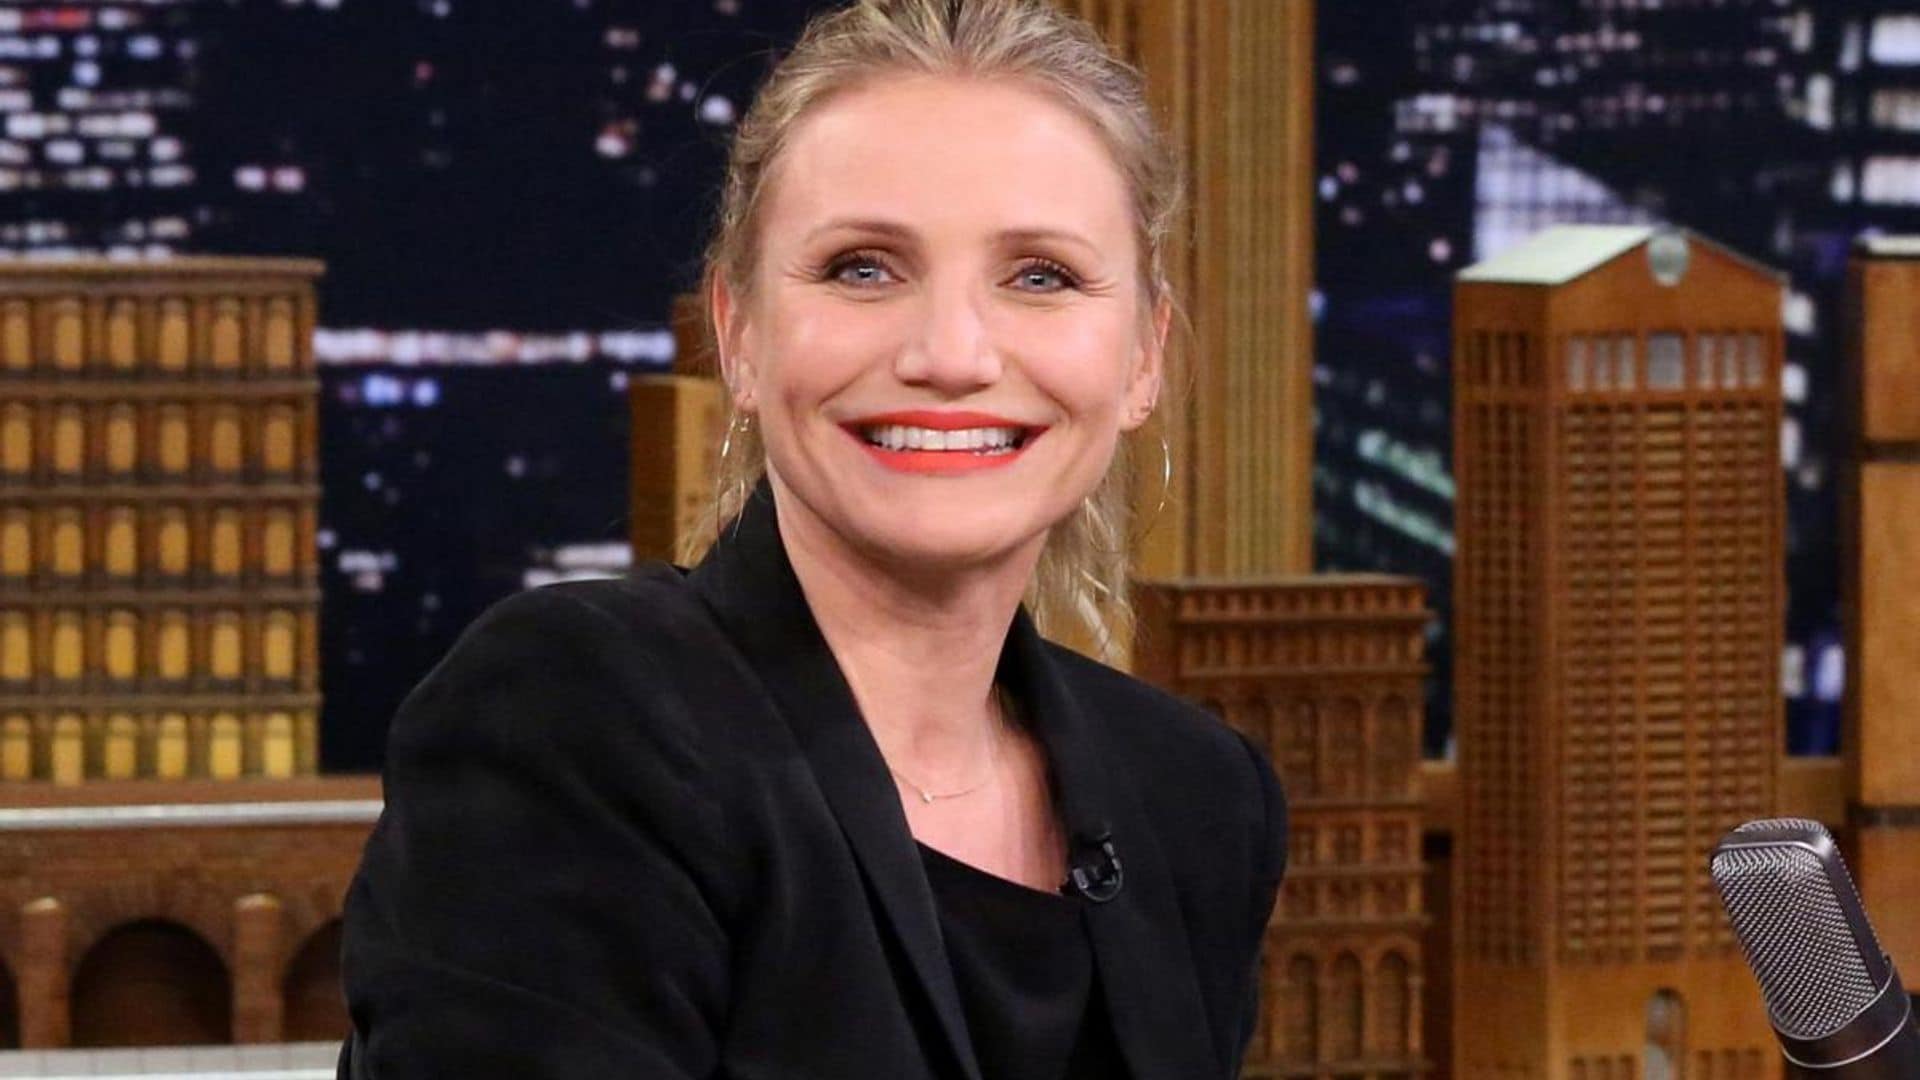 Cameron Diaz shares her experience as a mom and reveals why she is not going back to acting